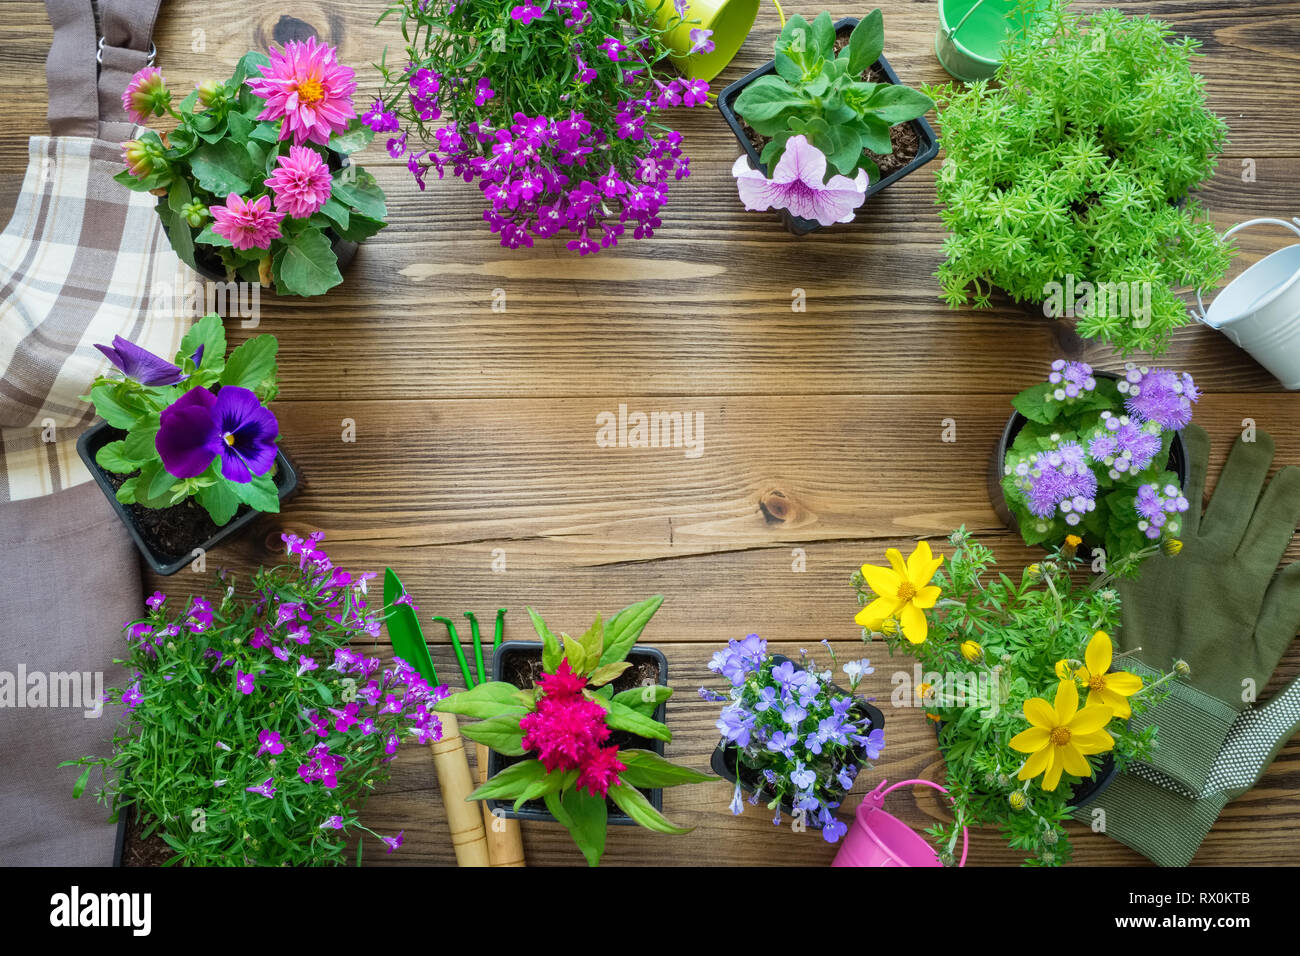 Seedlings of garden plants and nice flowers in flowerpots. Garden equipment: watering can, buckets, shovel, rake, gloves. Copy space for text. Stock Photo